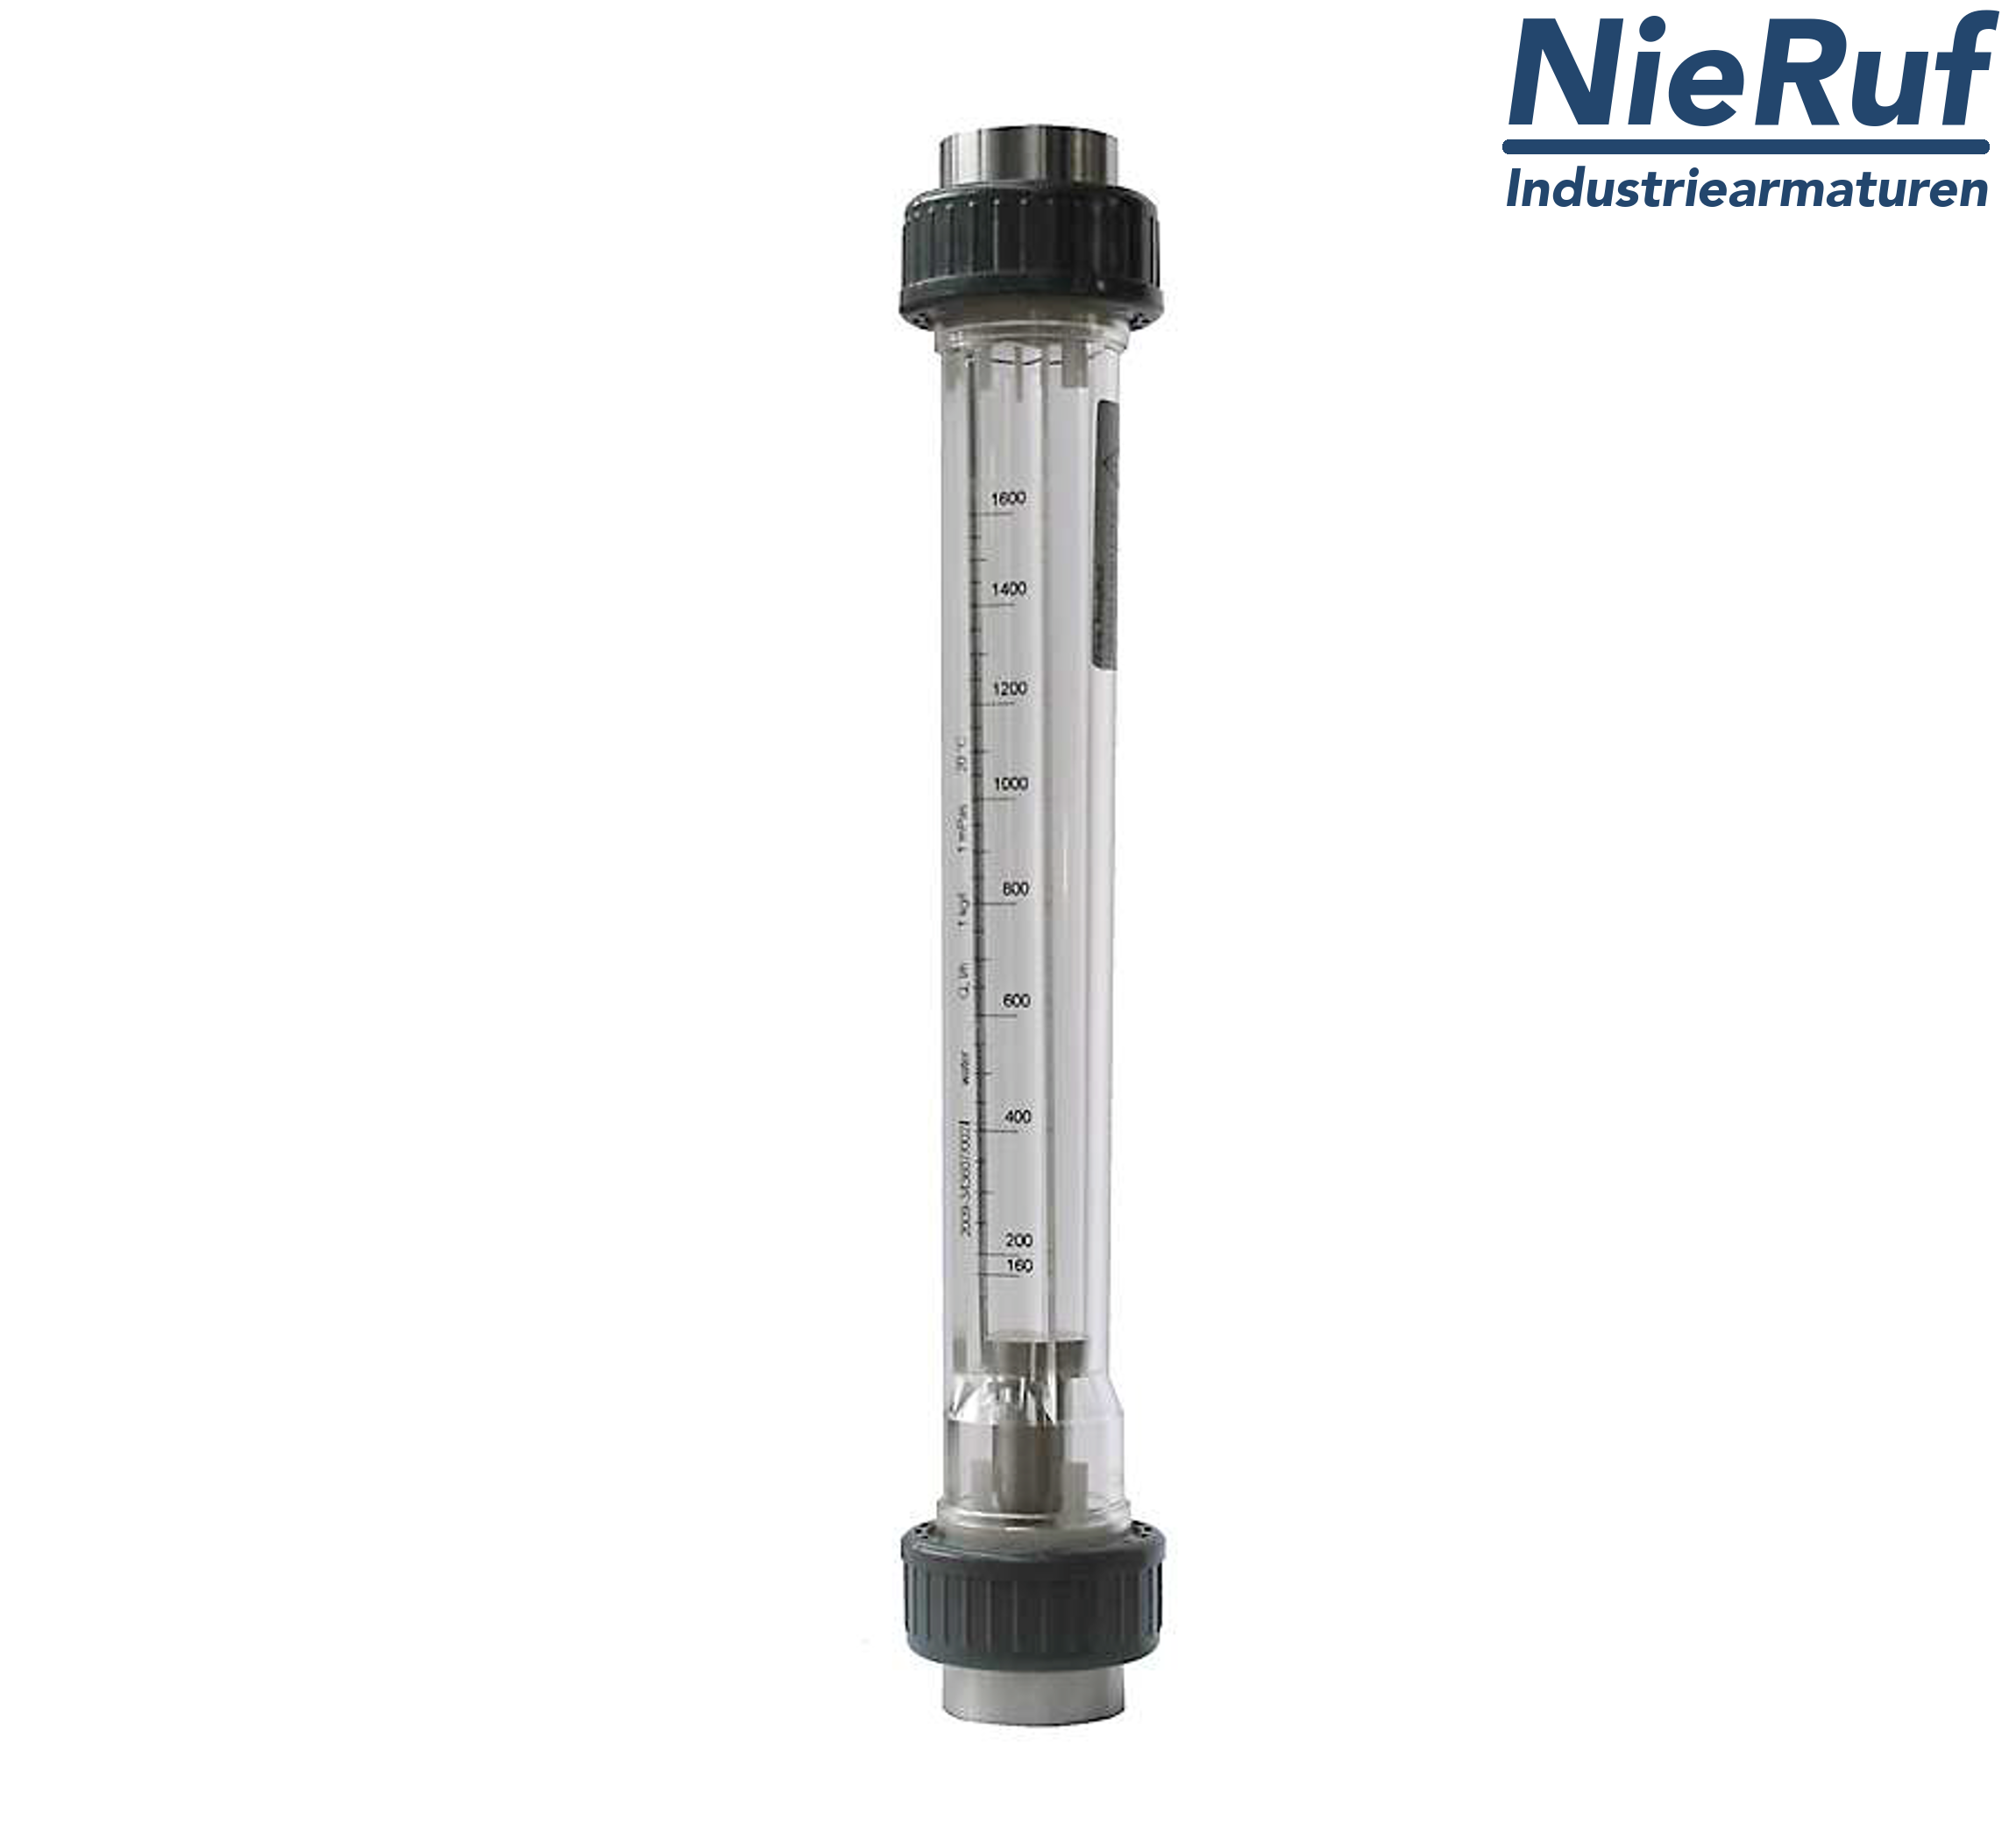 Variable area flowmeter 1 1/4" inch 6700.0 - 20000 l/h water FKM